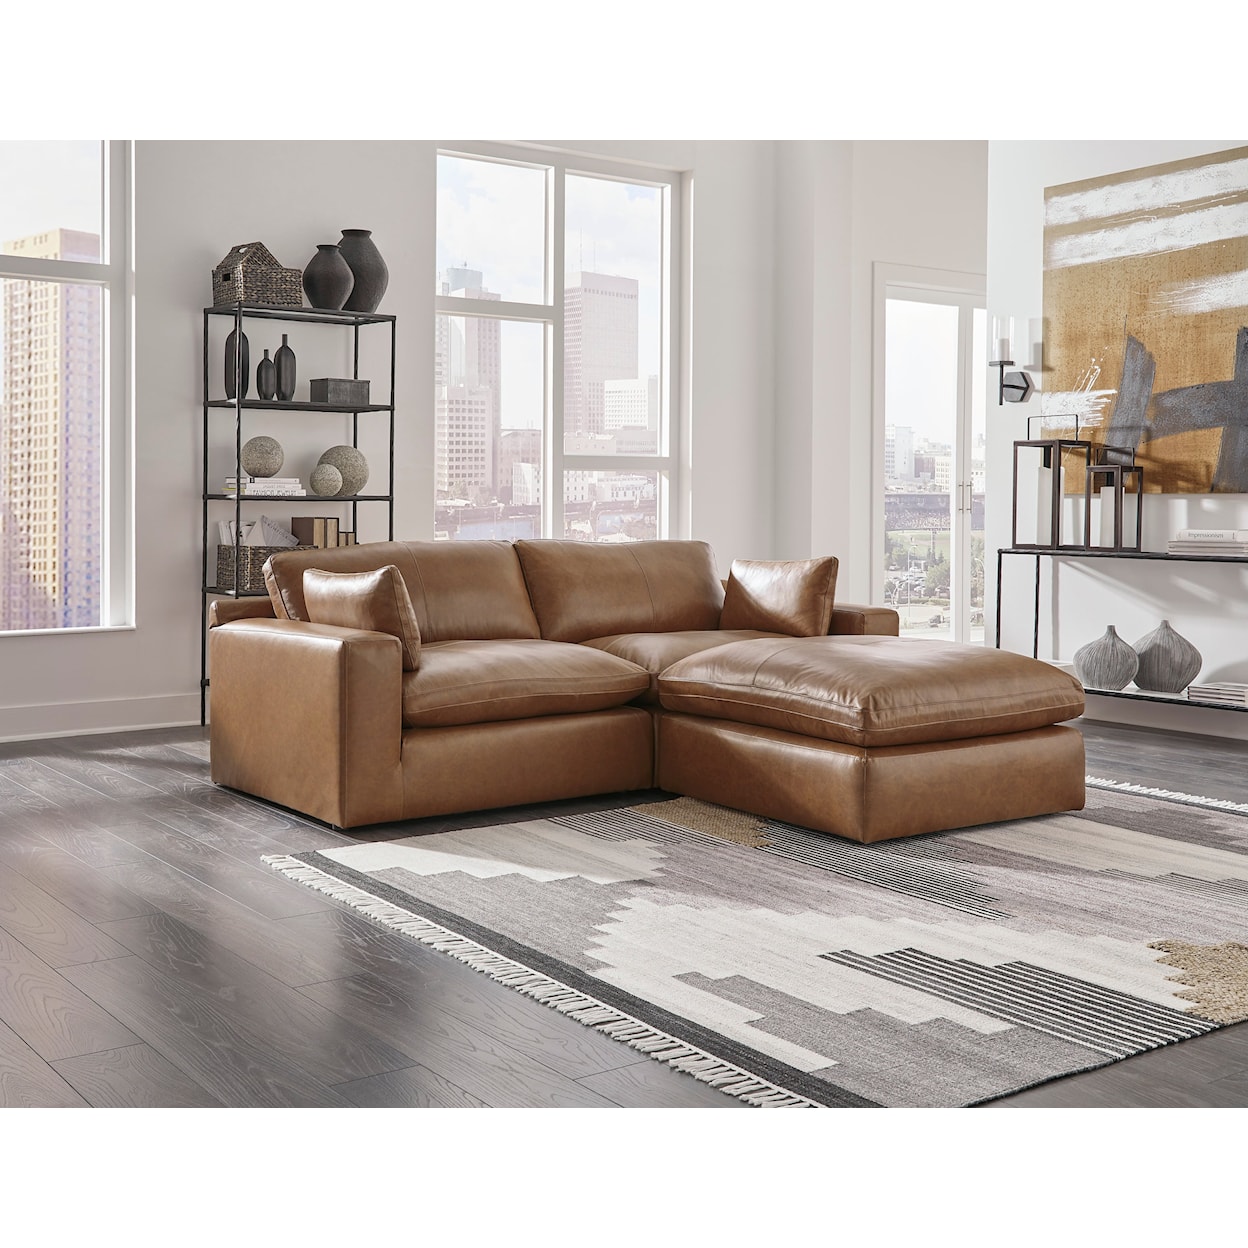 Benchcraft Emilia Leather Match Modular Sectional with Ottoman